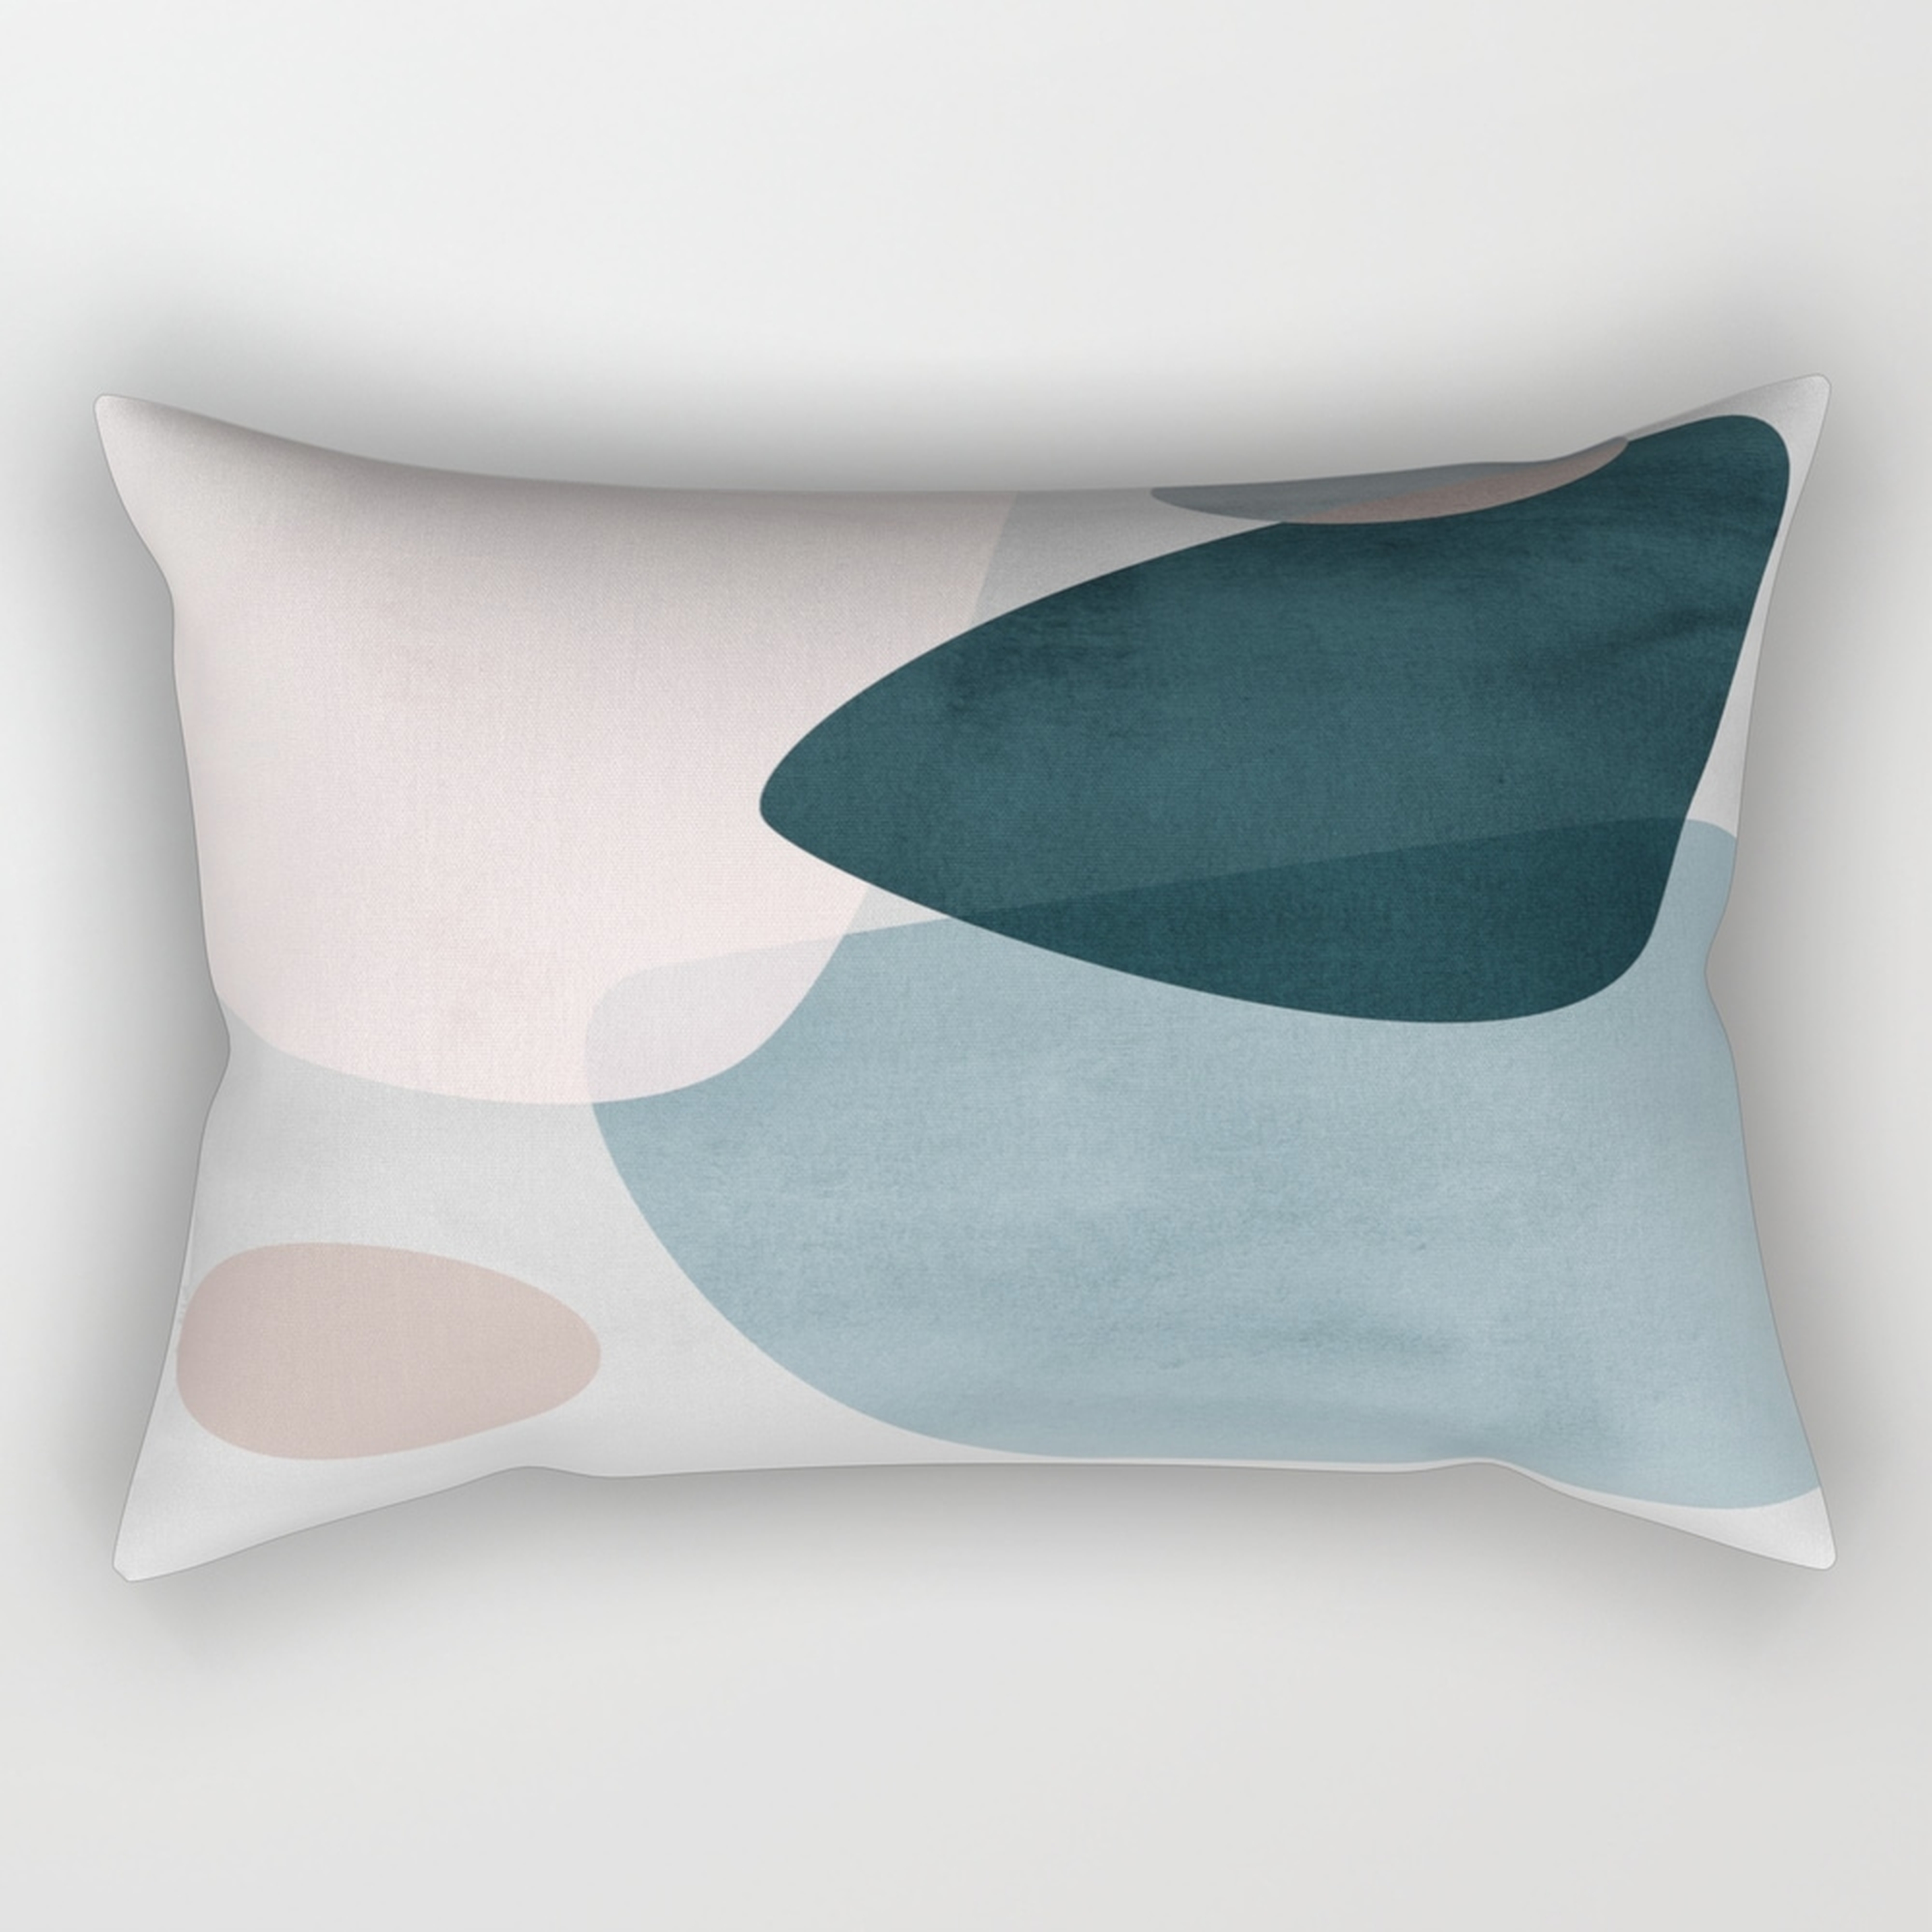 Graphic 150 A Rectangular Pillow - Small (17" x 12") - Society6